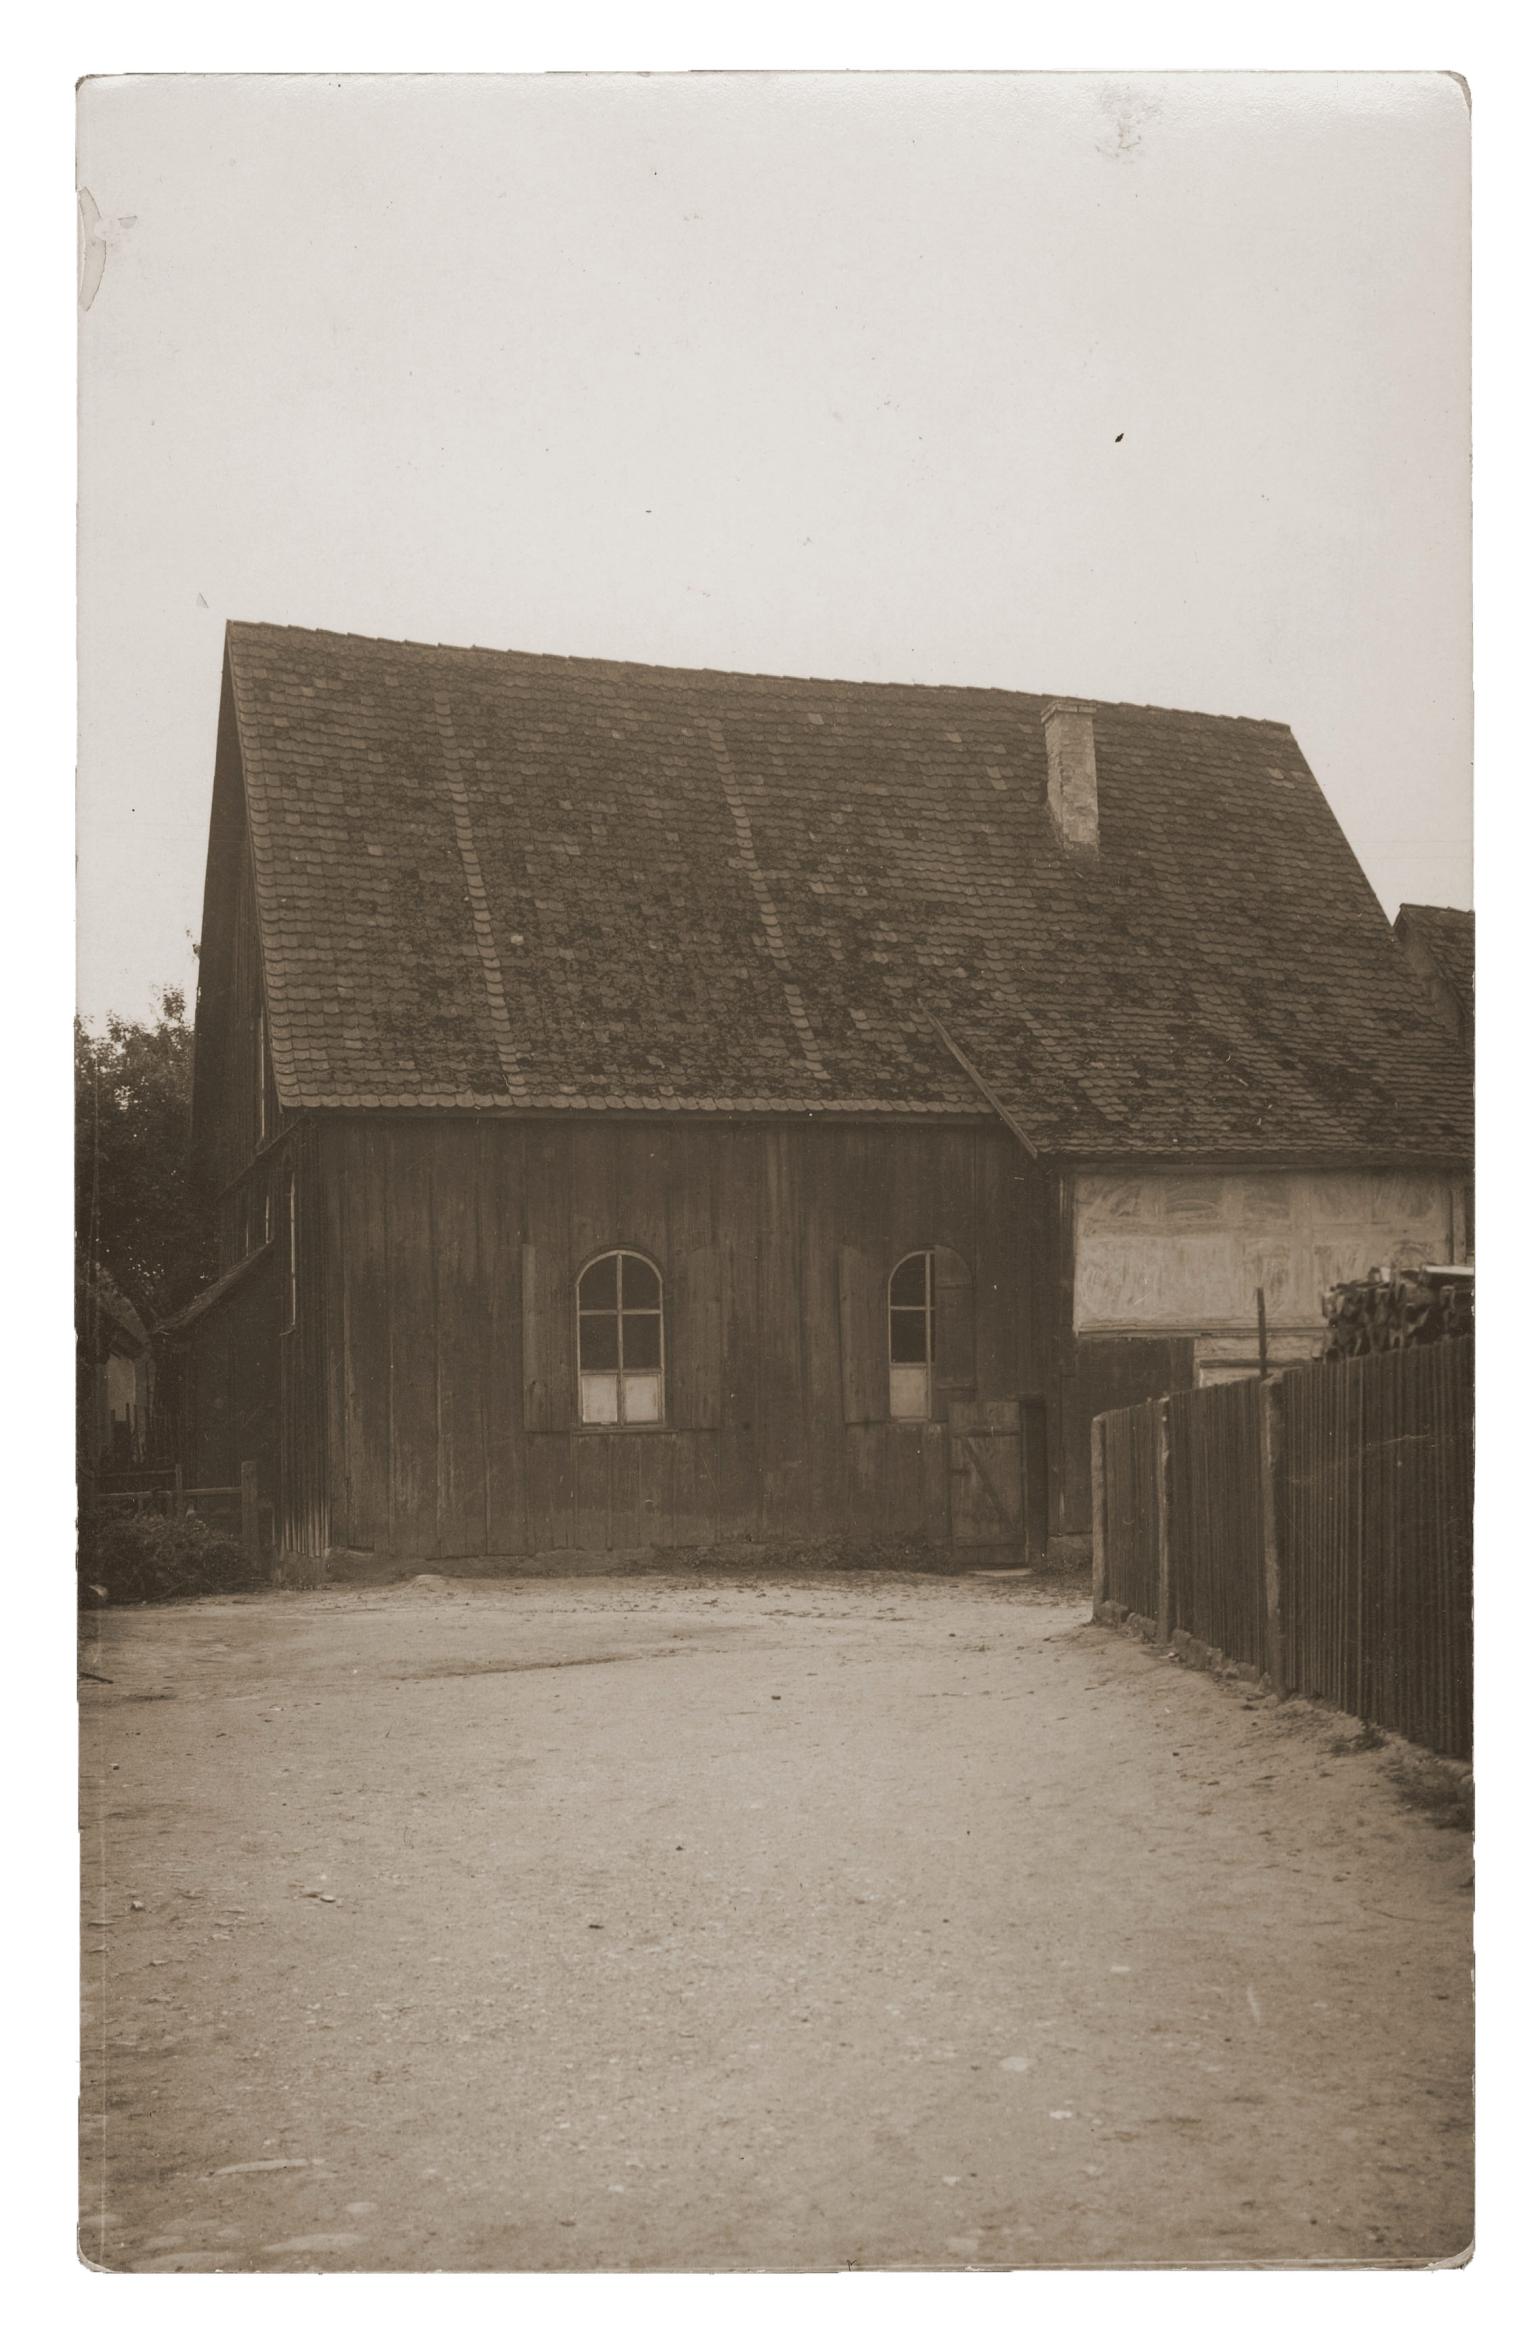 Exterior view of wooden building with dirt path.